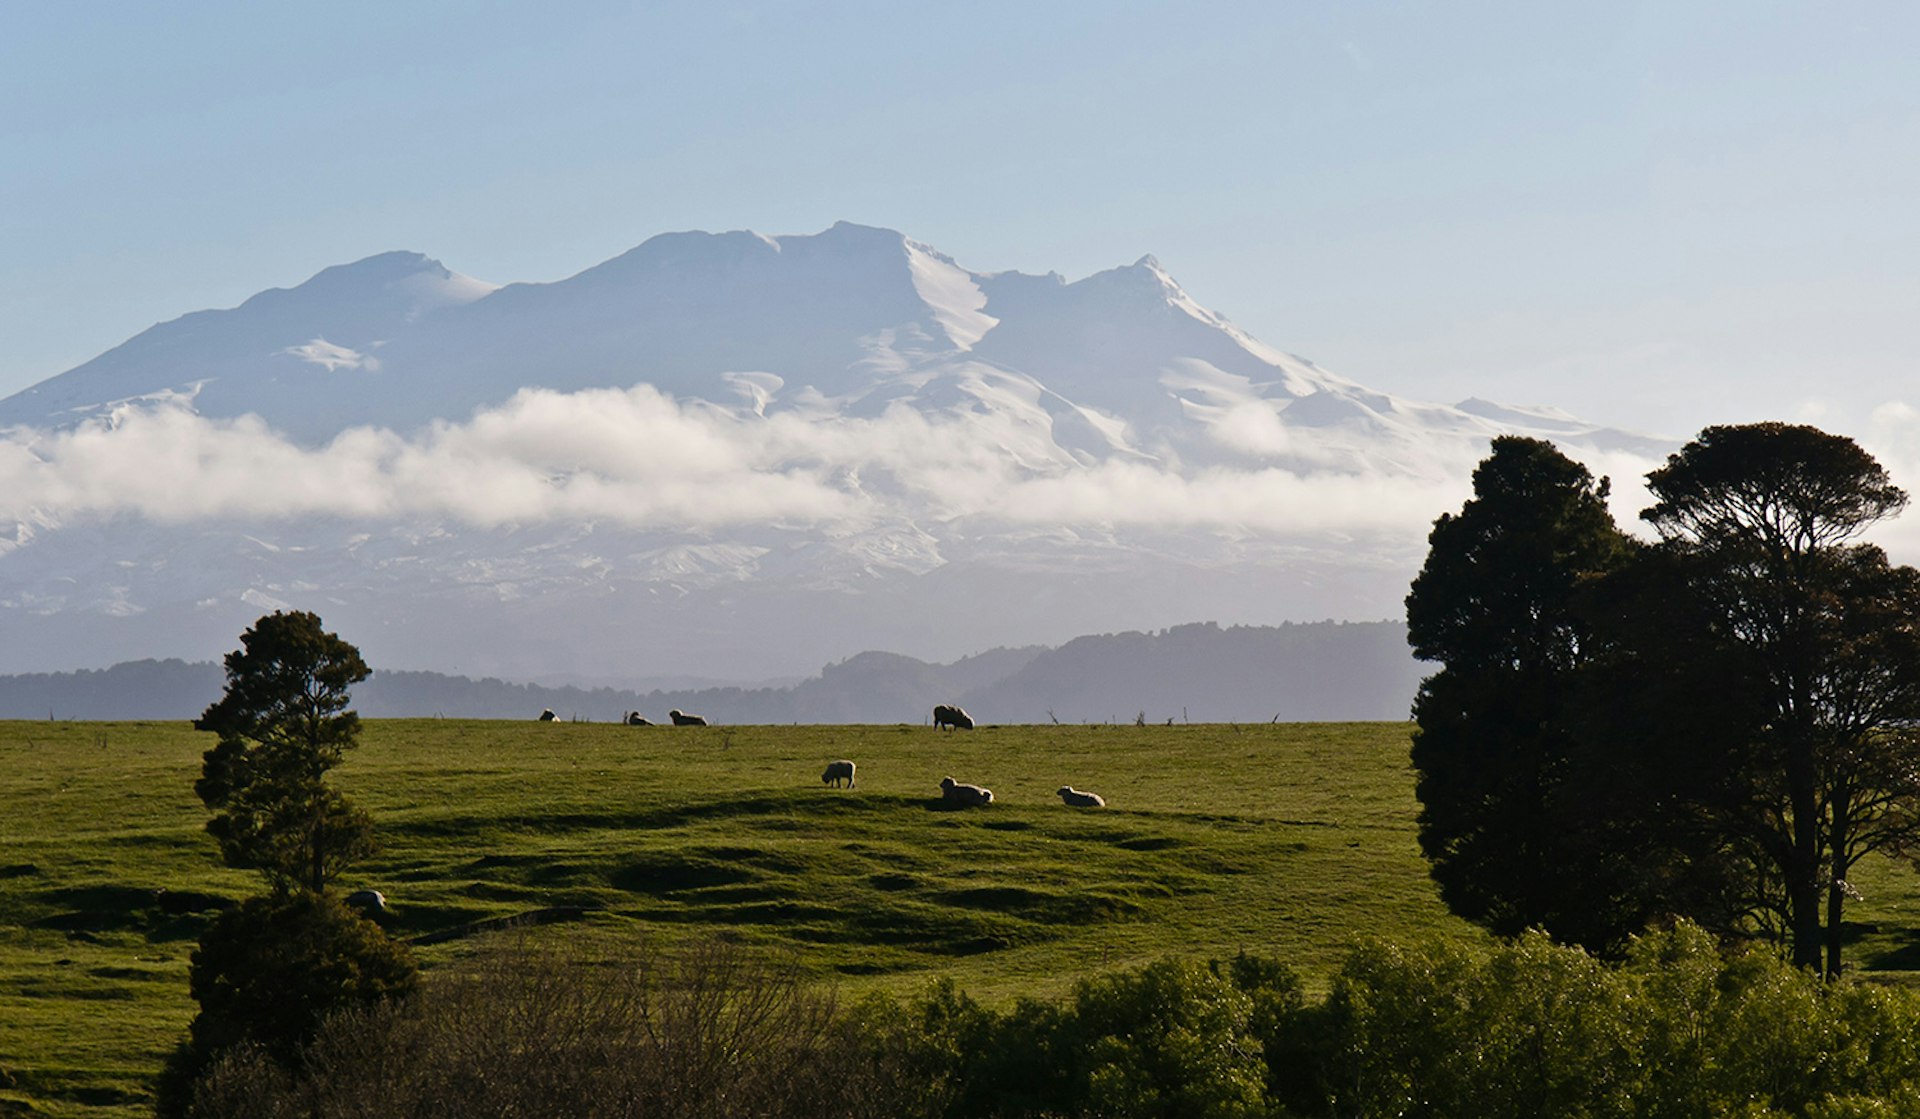 The striking silhouette of Mount Ruapehu rising from the clouds might make it hard to fix your eyes on the road. Image by Jason Pratt / CC BY 2.0